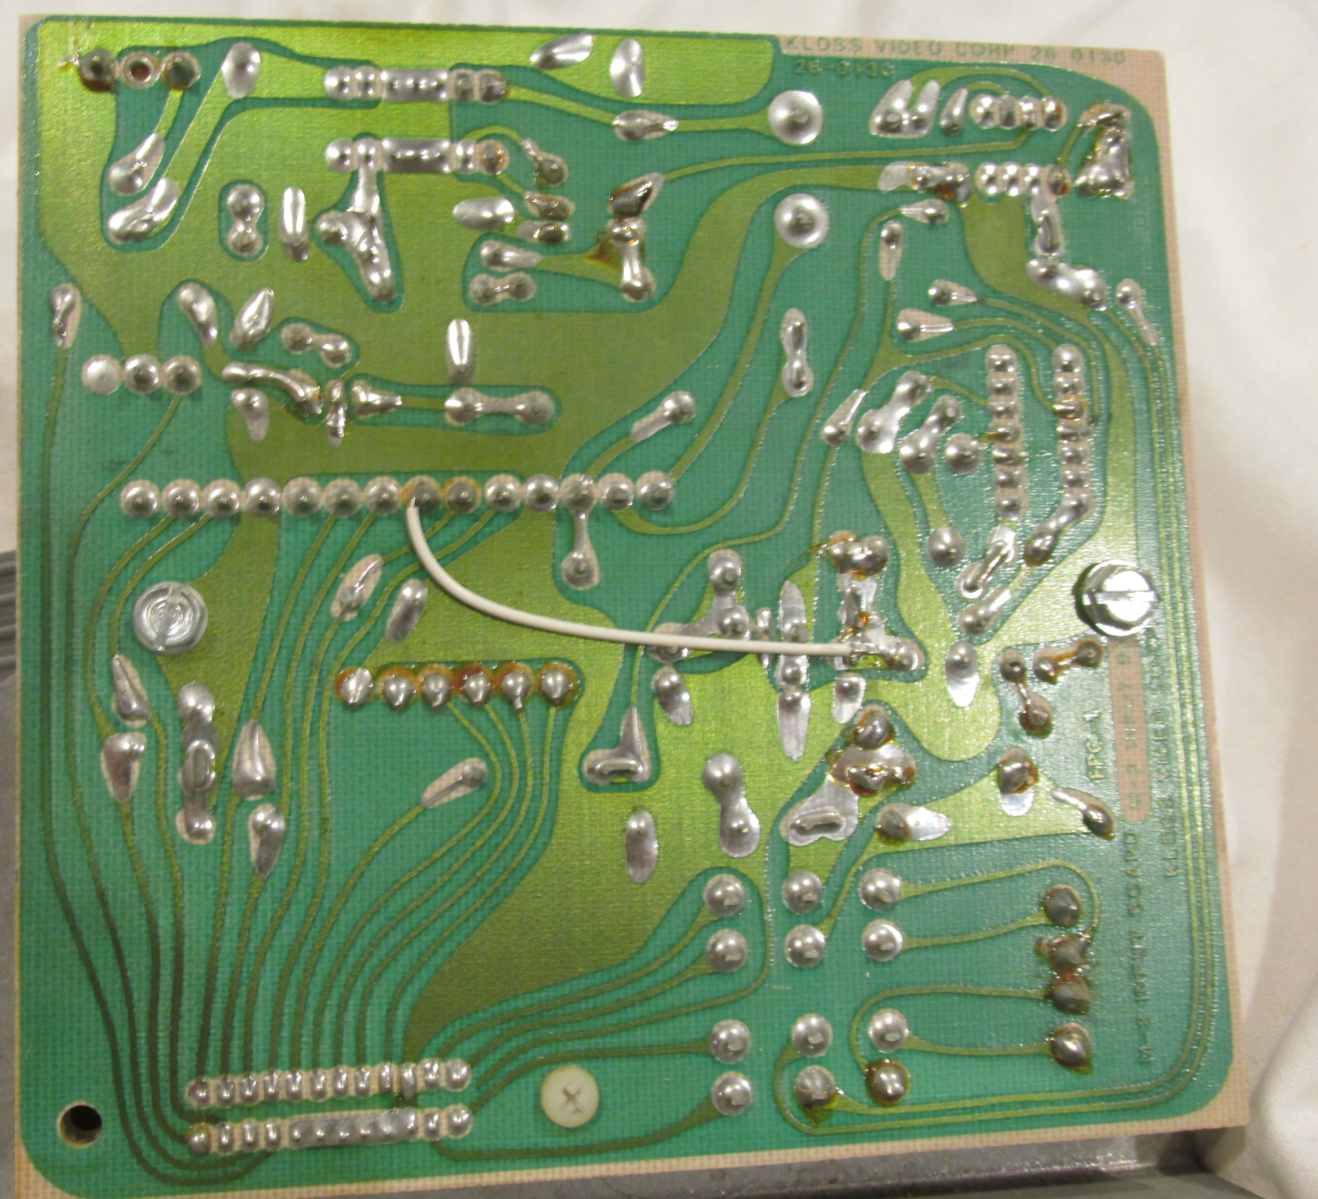 A pink L-shaped circuit board on a pink background